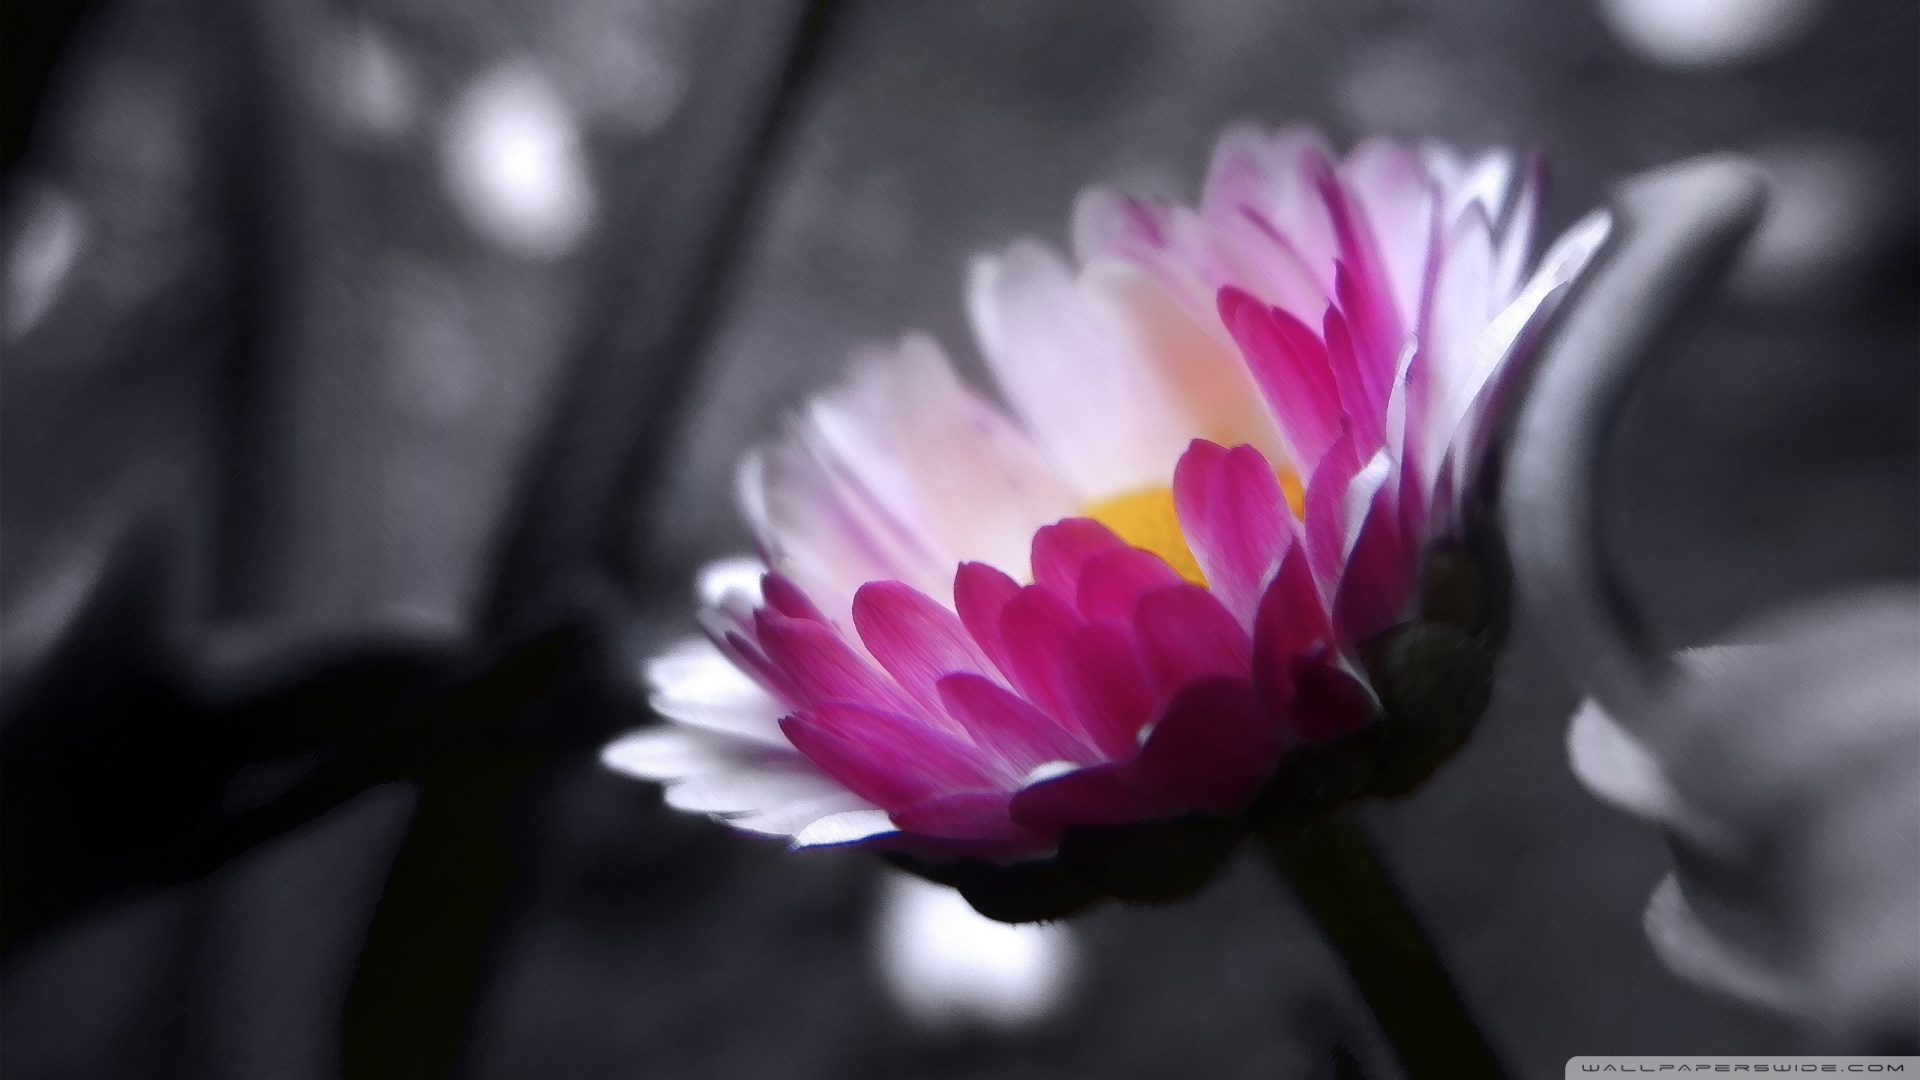 Pink Flower On Black And White Background Wallpaper